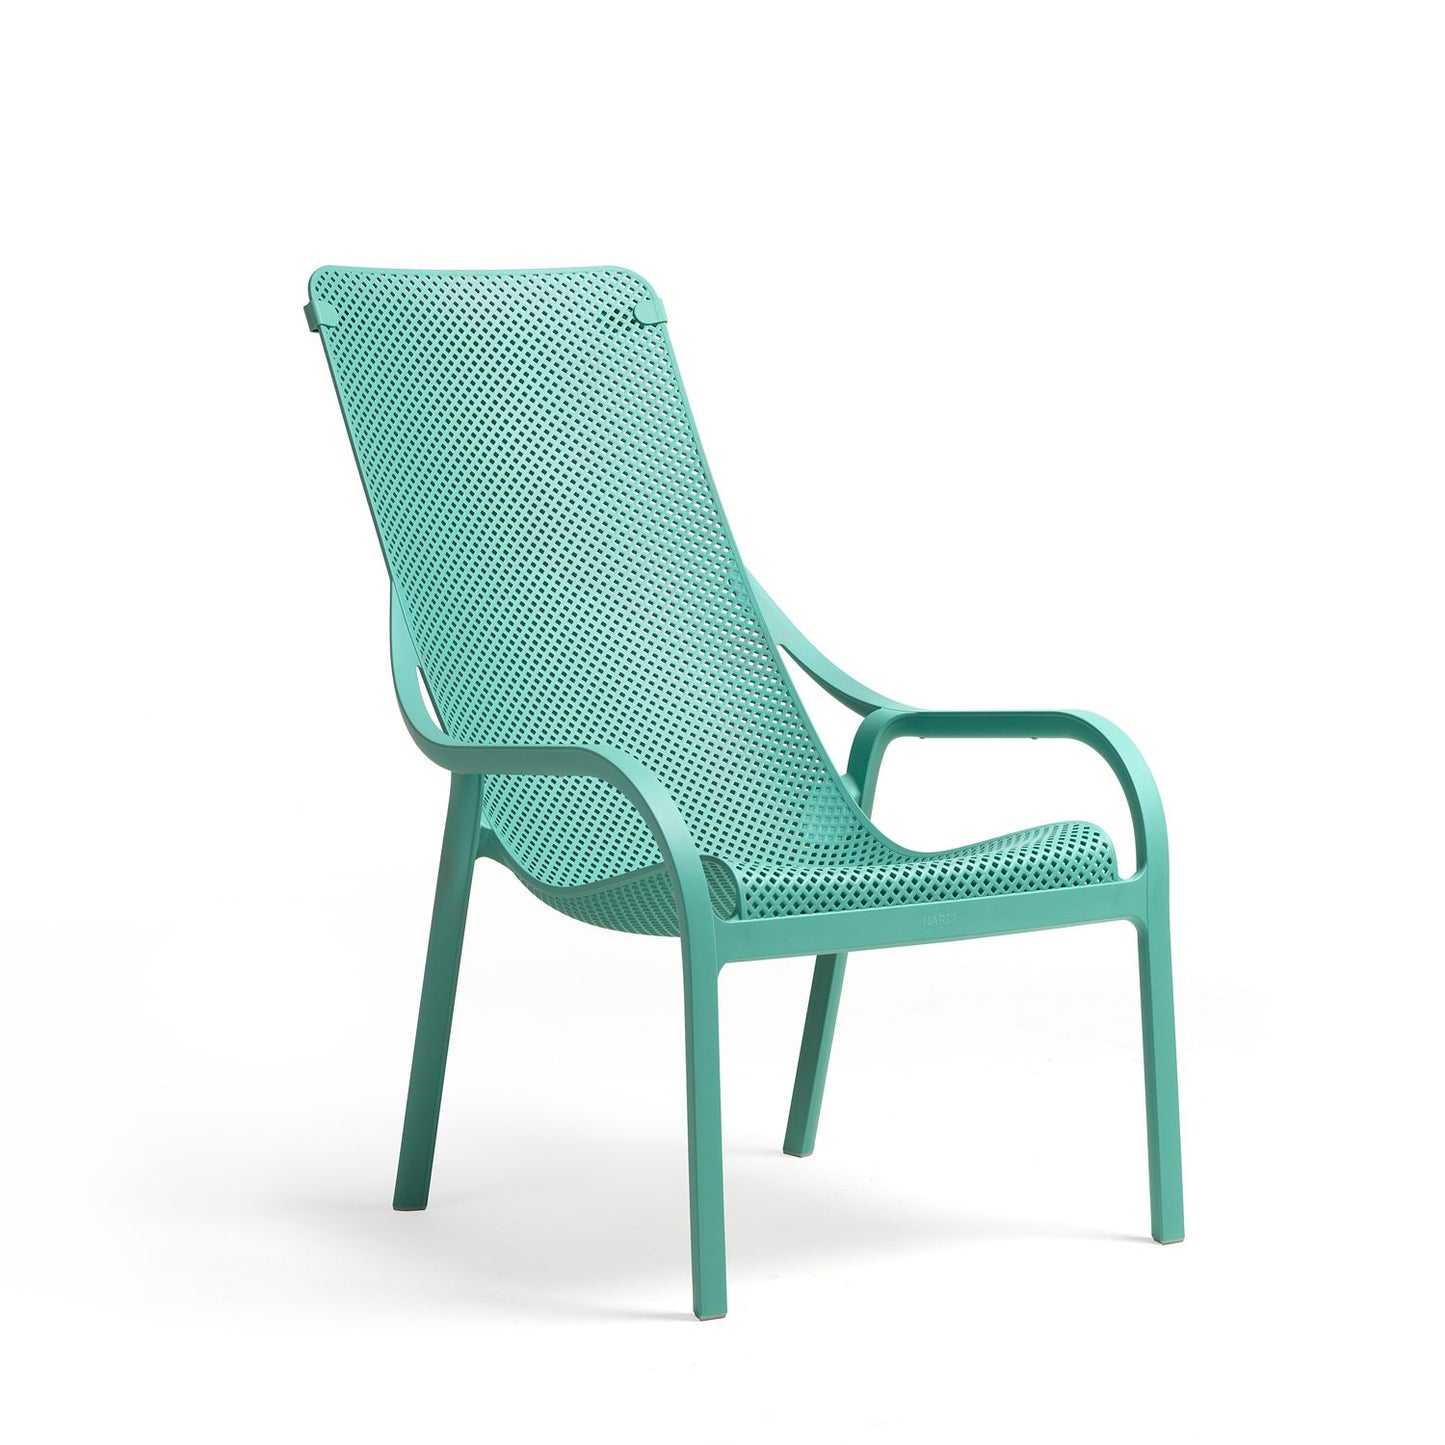 Net Lounge Chair By Nardi - Turquoise